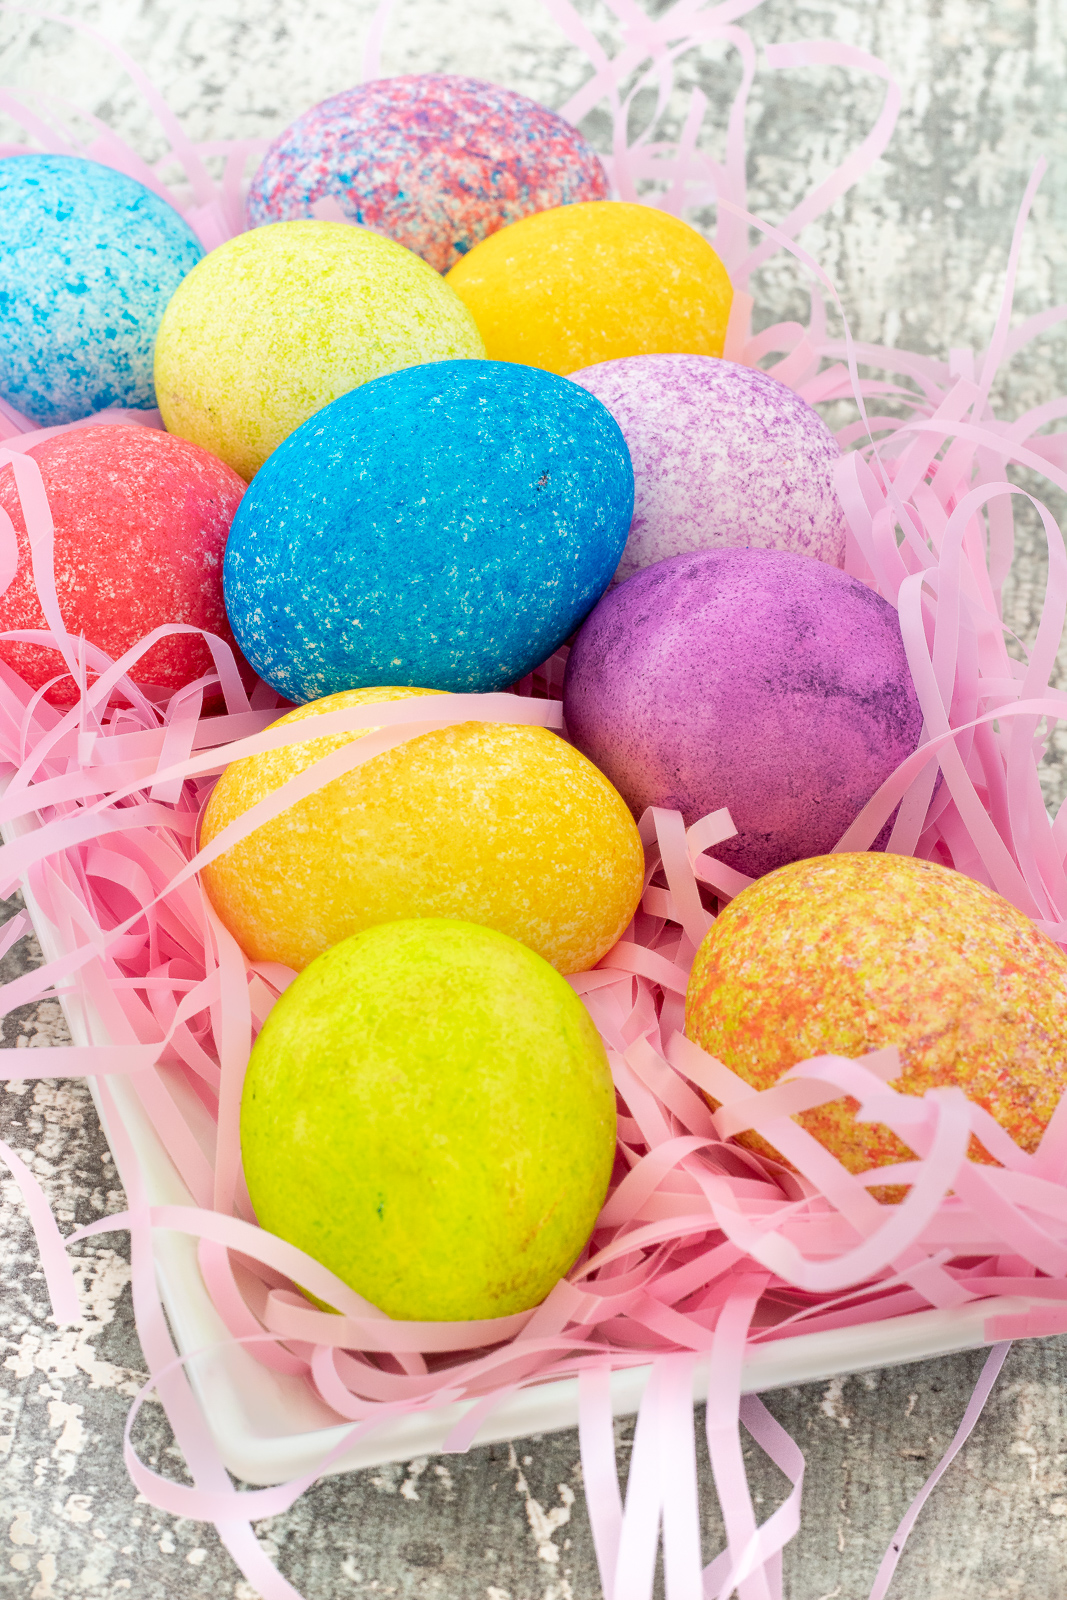 How to dye Easter eggs with rice